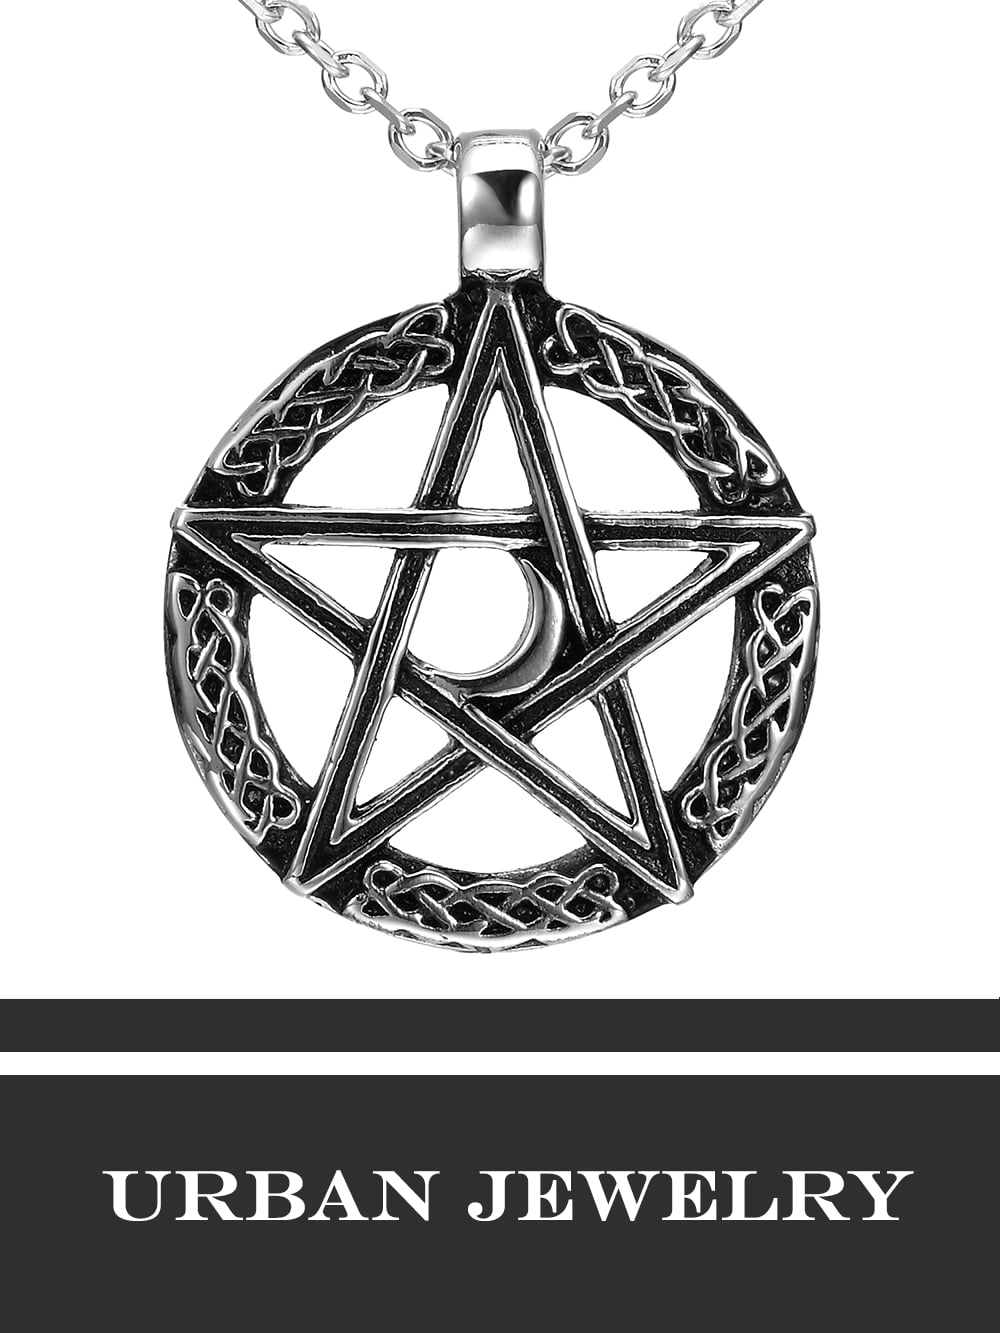 Stainless Steel Pentagram Protection Wicca Jewelry for Men Women Can Customized FaithHeart Tetragrammaton Pentacle Necklace 